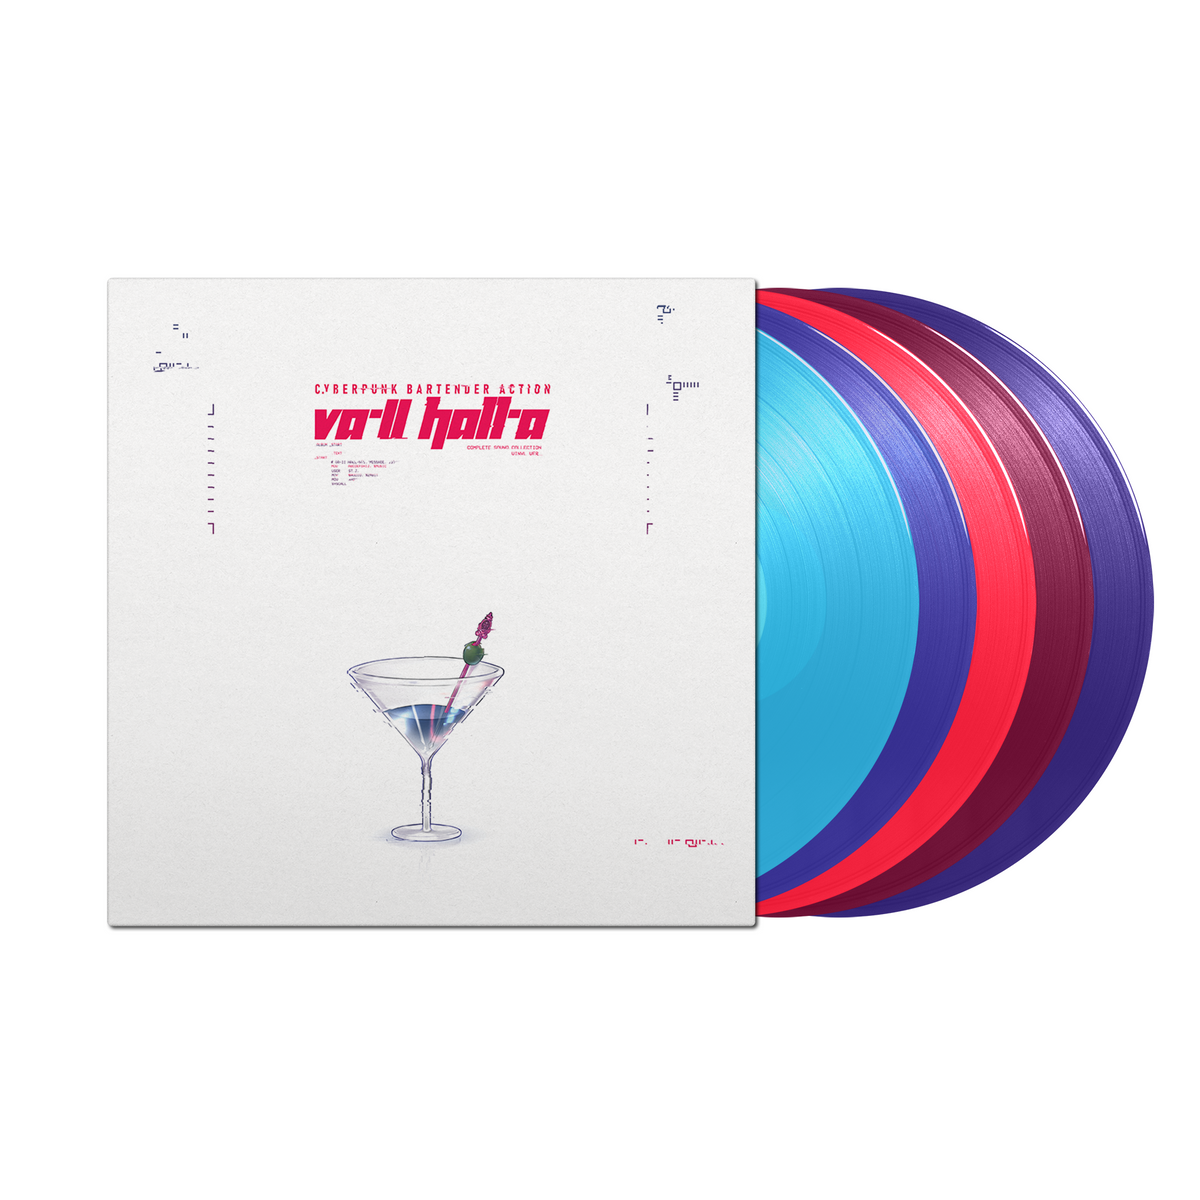 Garoad - VA-11 HALL-A: Complete Sound Collection [New 5x 12-inch 